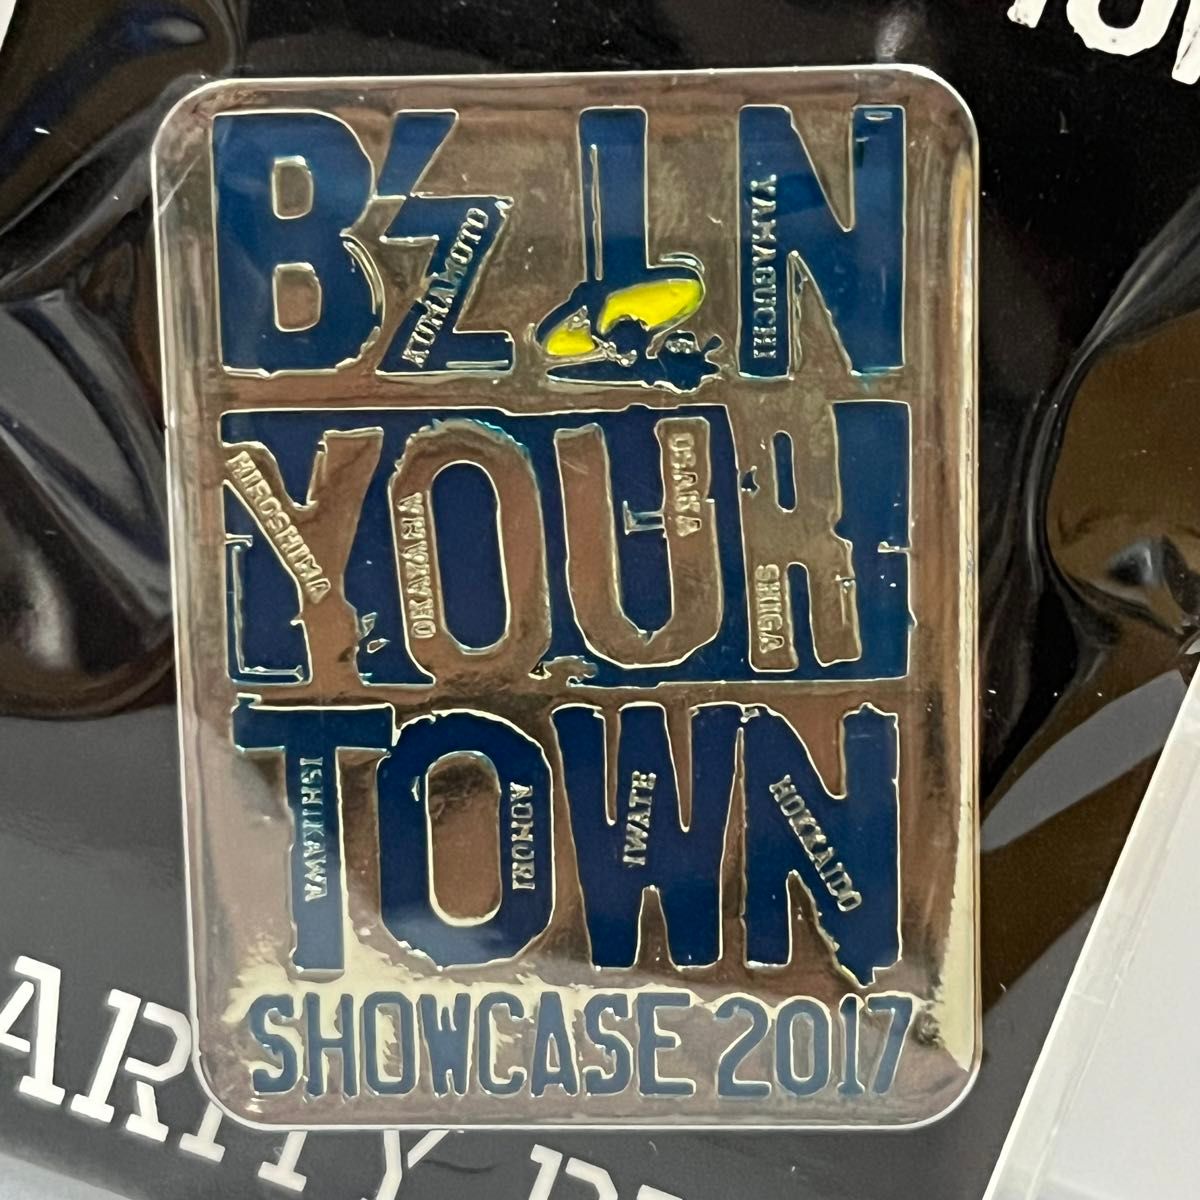 B'z IN YOUR TOWN SHOWCASE 2017 チャリティーピンズ　チャリティーピンバッジ